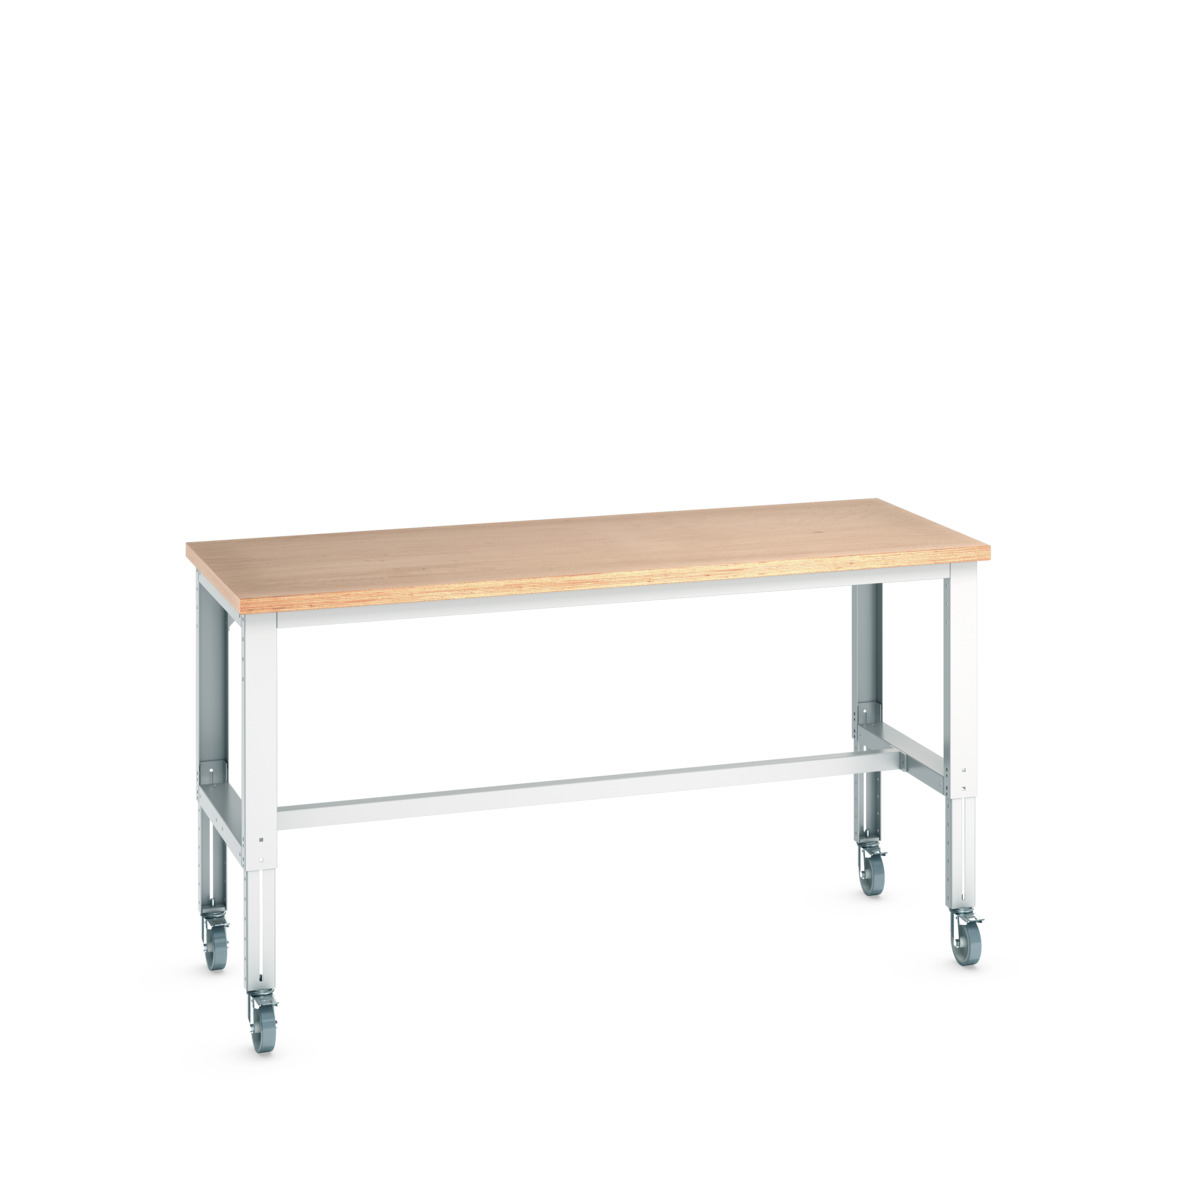 41004143.16V - cubio mobile bench adj height (mpx)